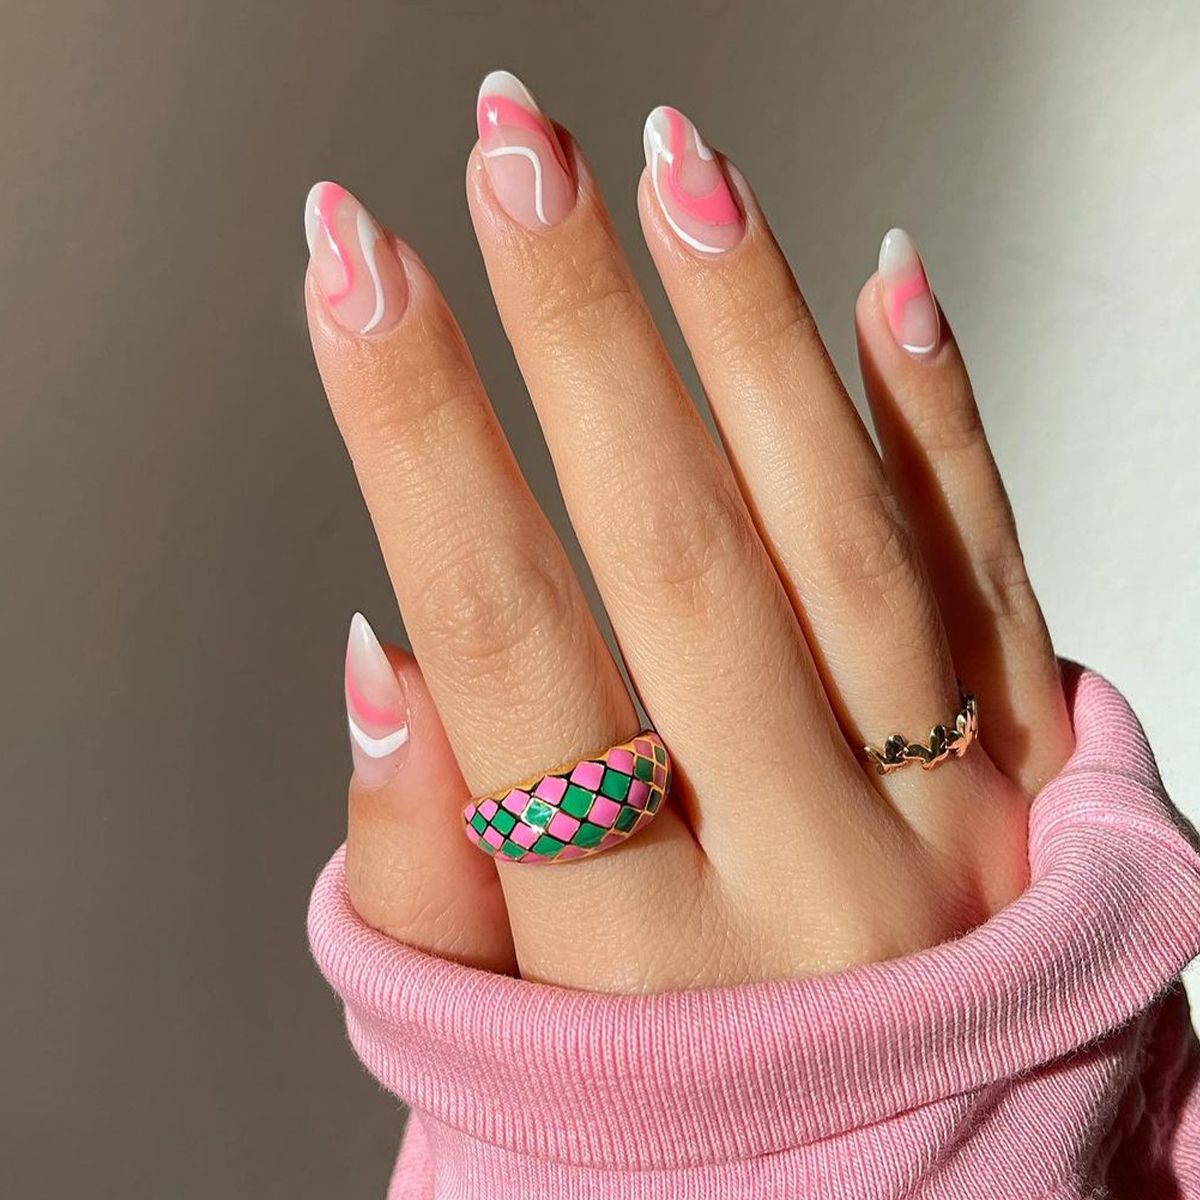 30 Ideas With Long Nails For Different Shapes | Unhas, Unha